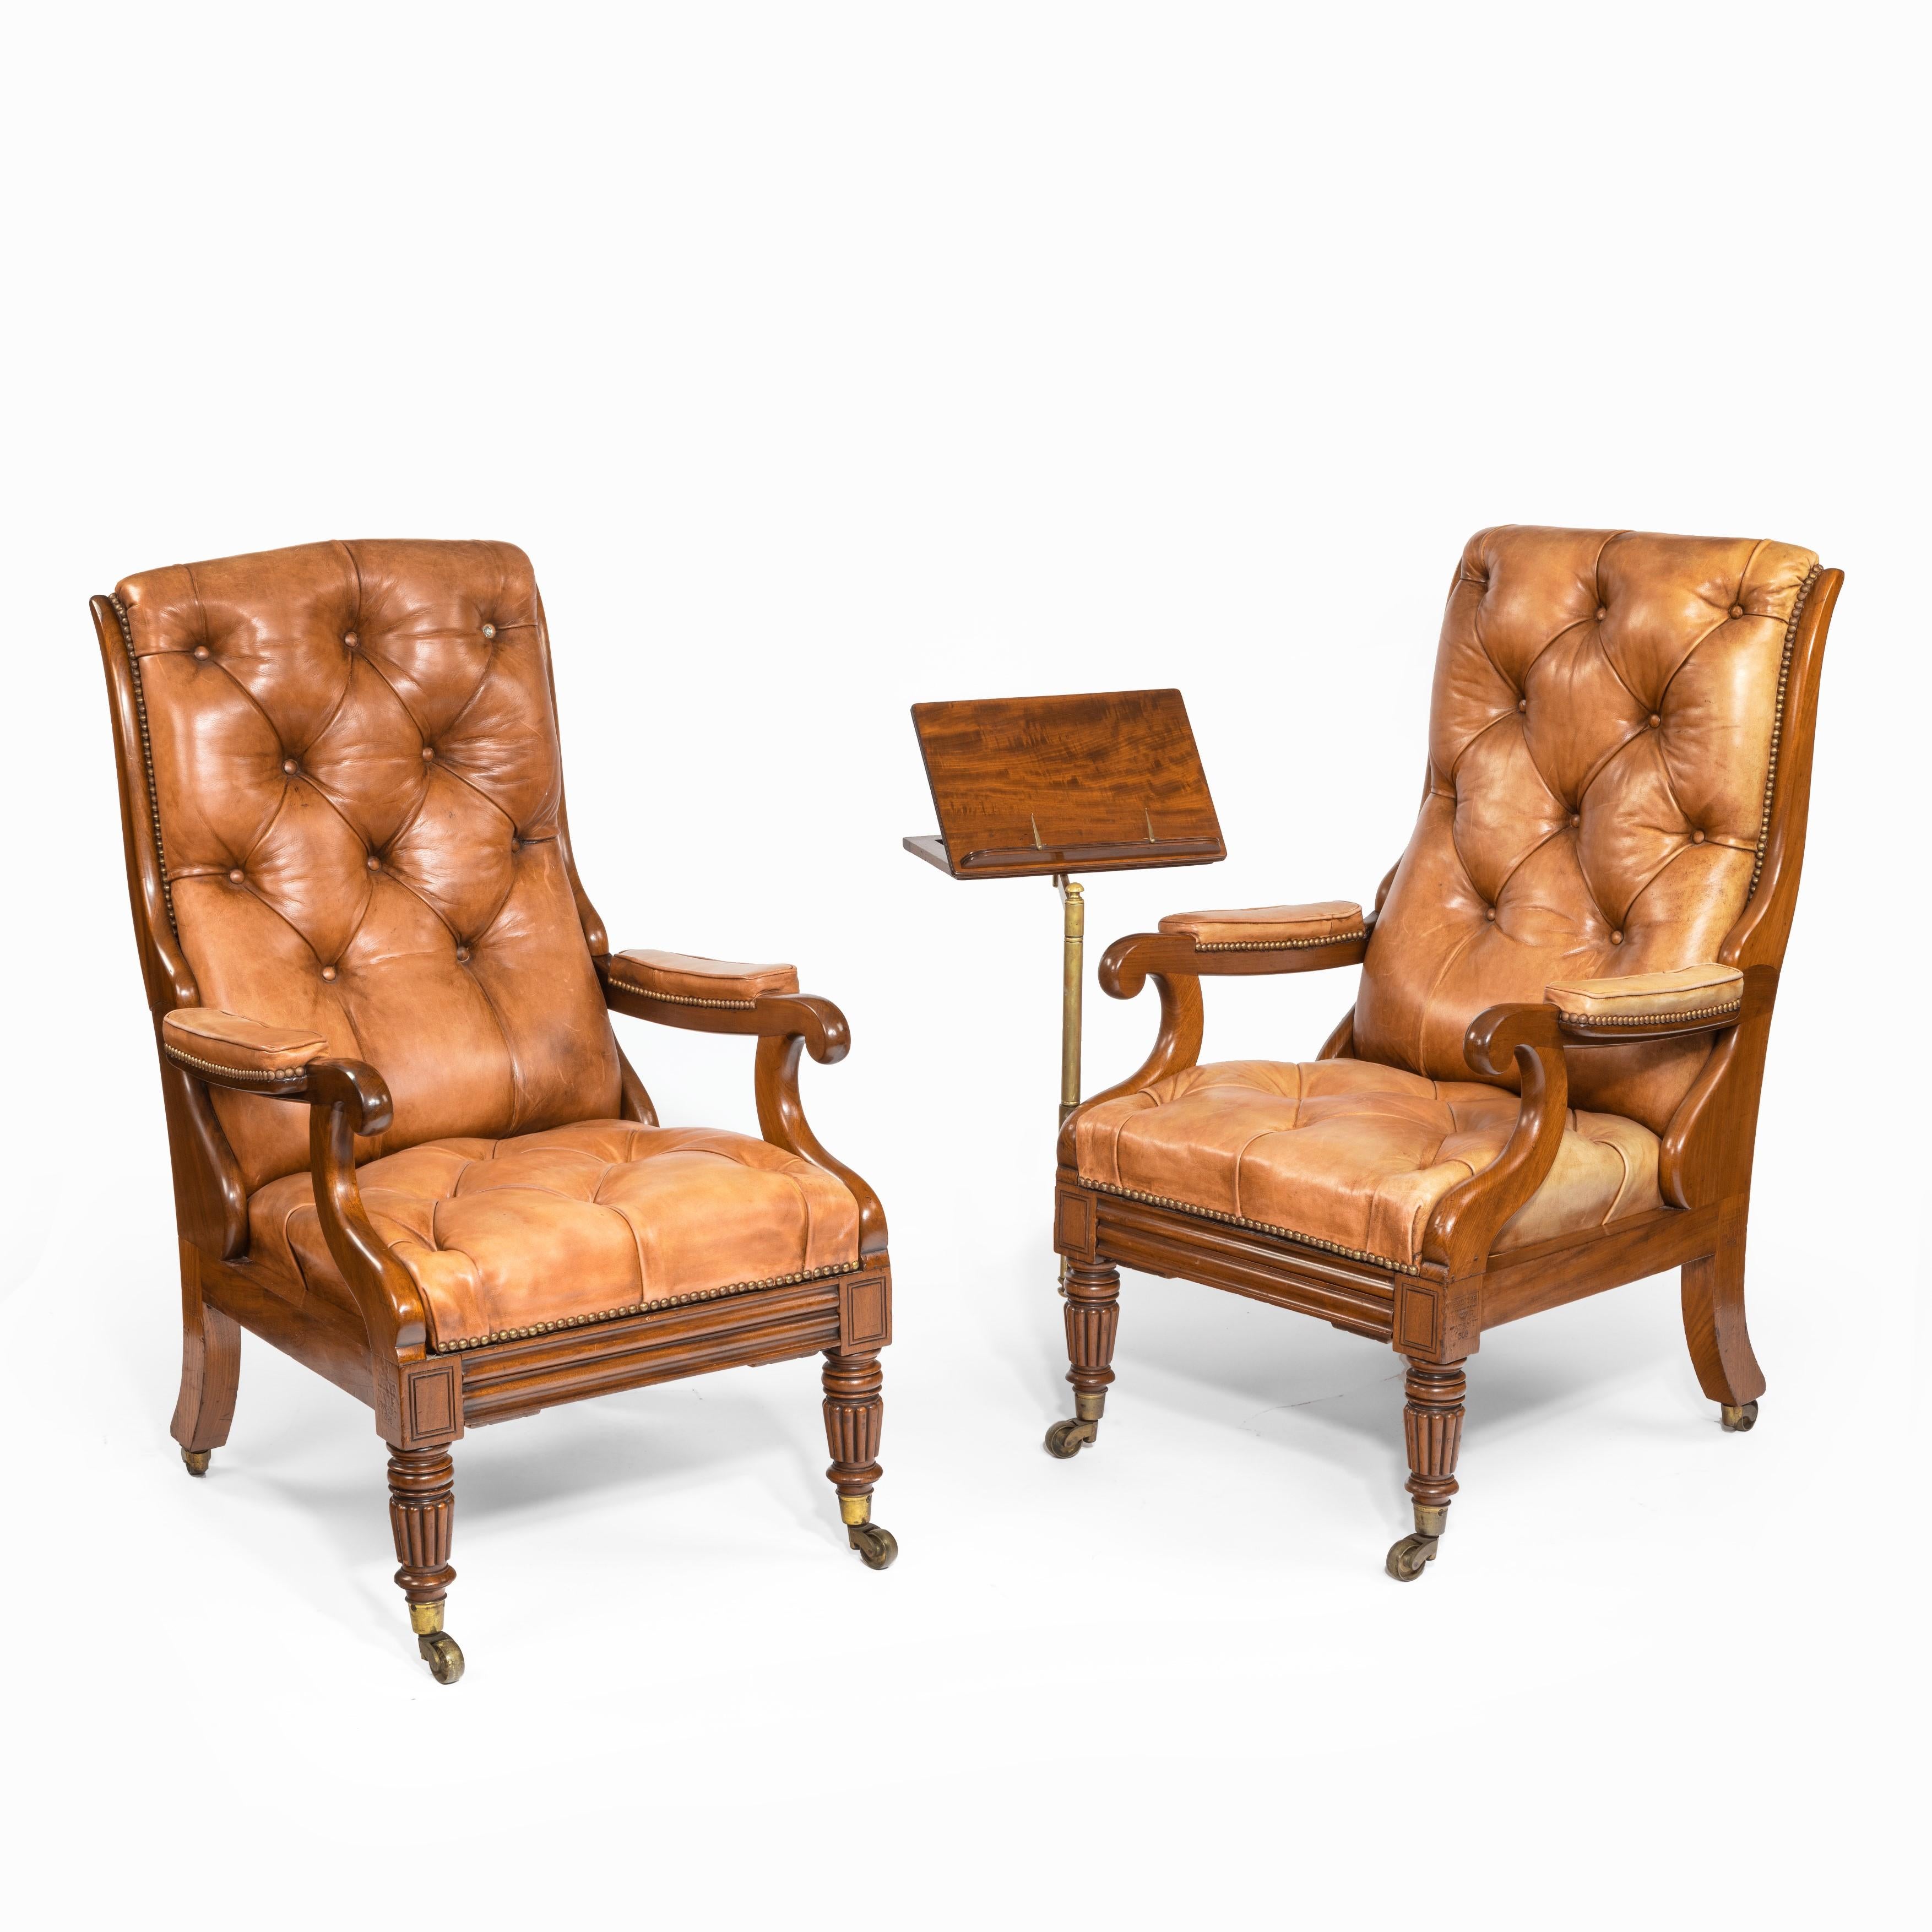 Mid-19th Century Pair of William IV Adjustable Mahogany Library Armchairs, by George Minter For Sale